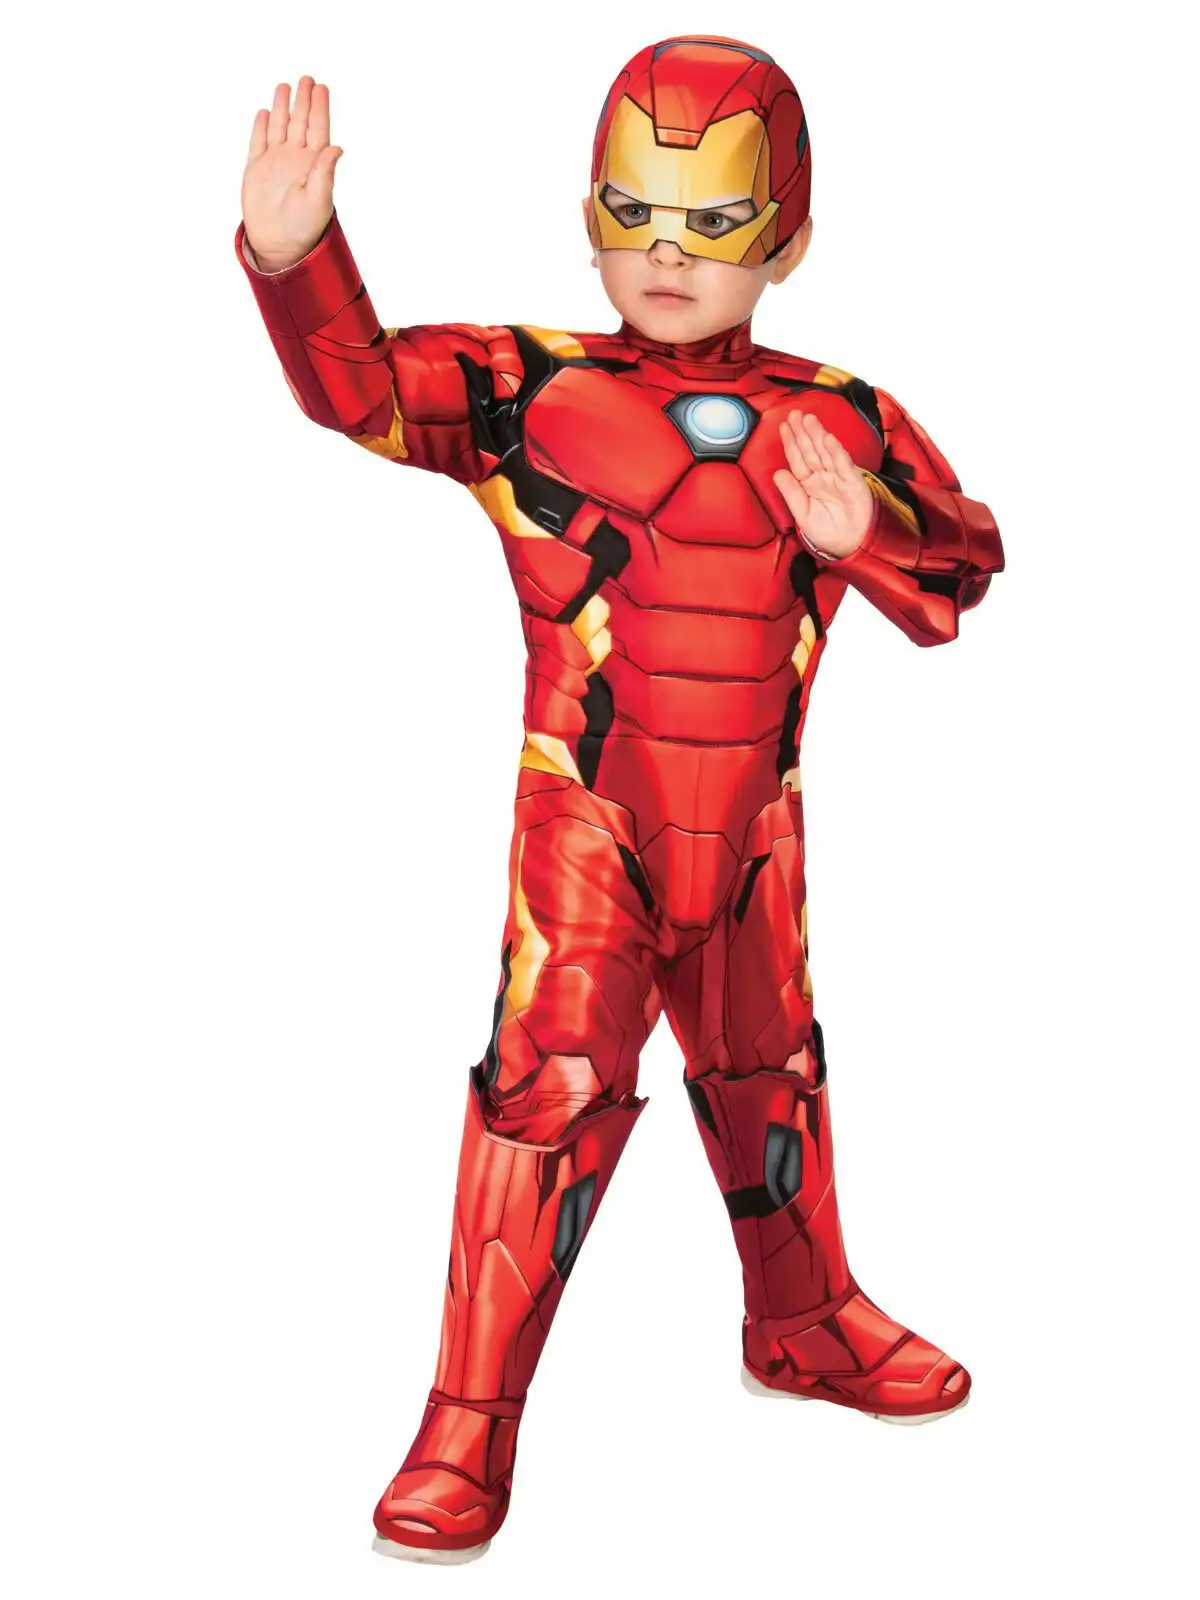 Marvel Iron Man Character Deluxe Dress Up Costume - Unisex Size Toddler/Baby